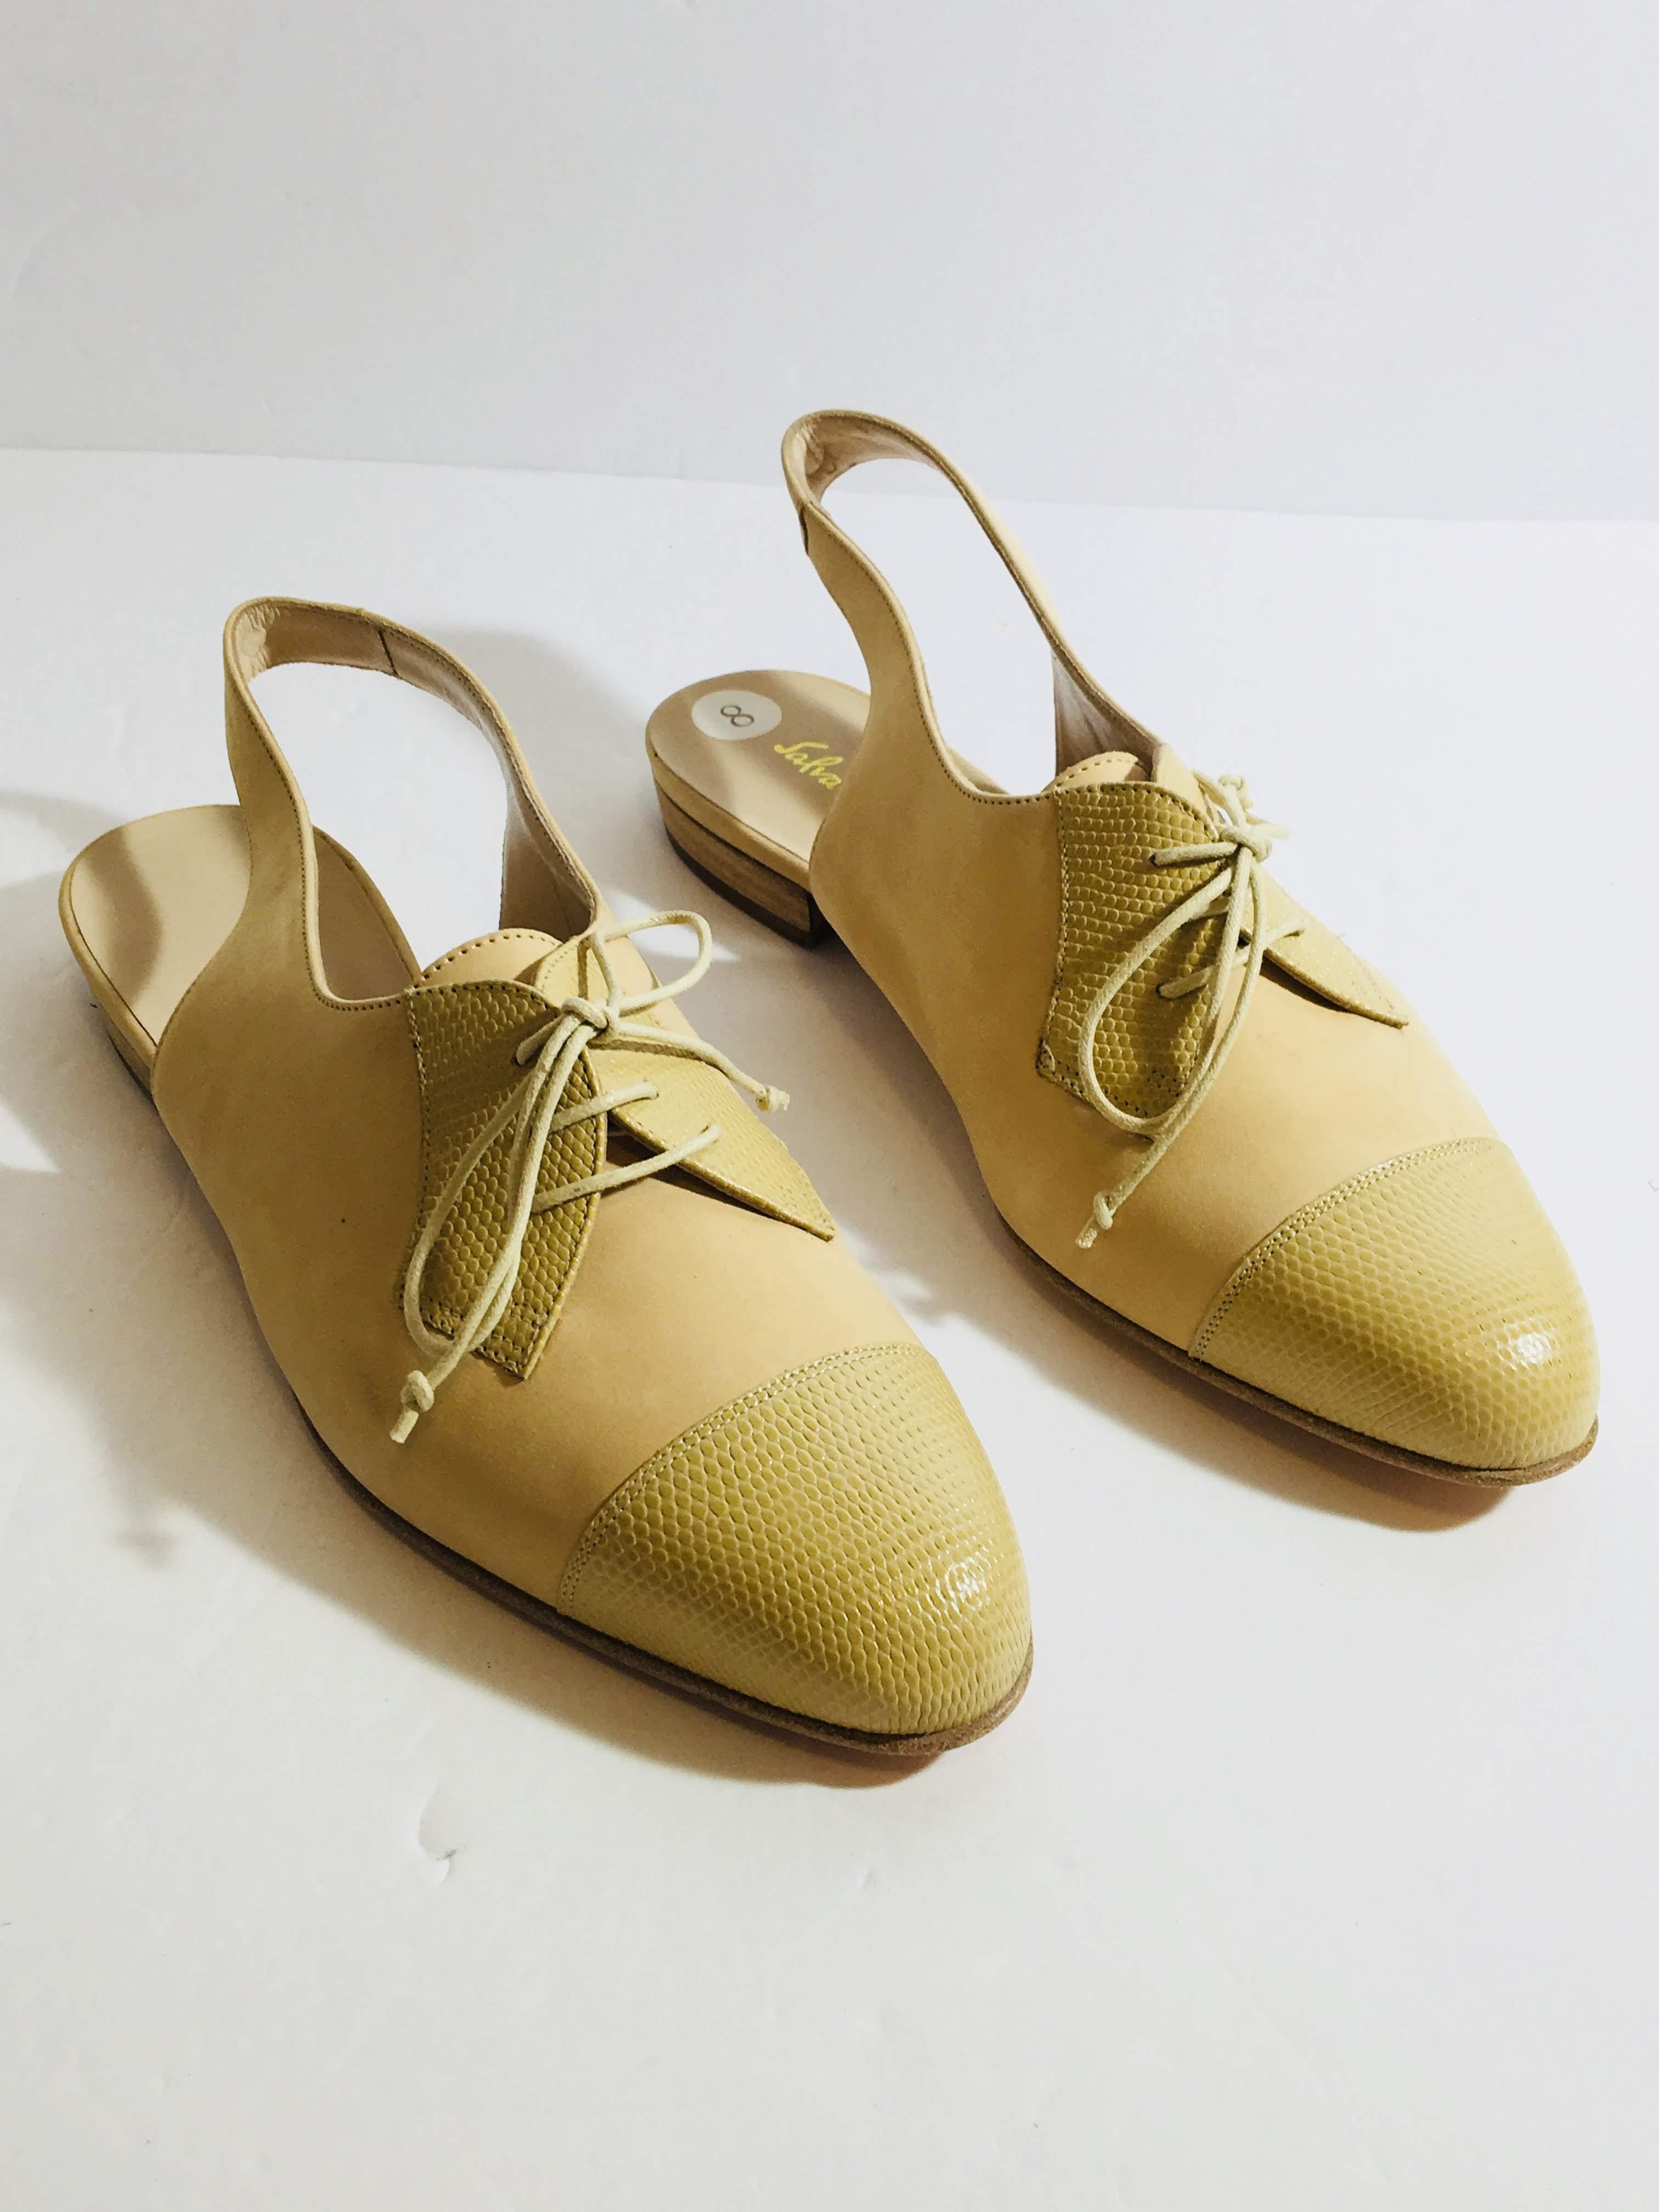 Salvatore Ferragamo Shoes in Nude Leather. Nubuck Sling Back Lace Up Shoes with Lizard Detail Toe Cap. US Size 8